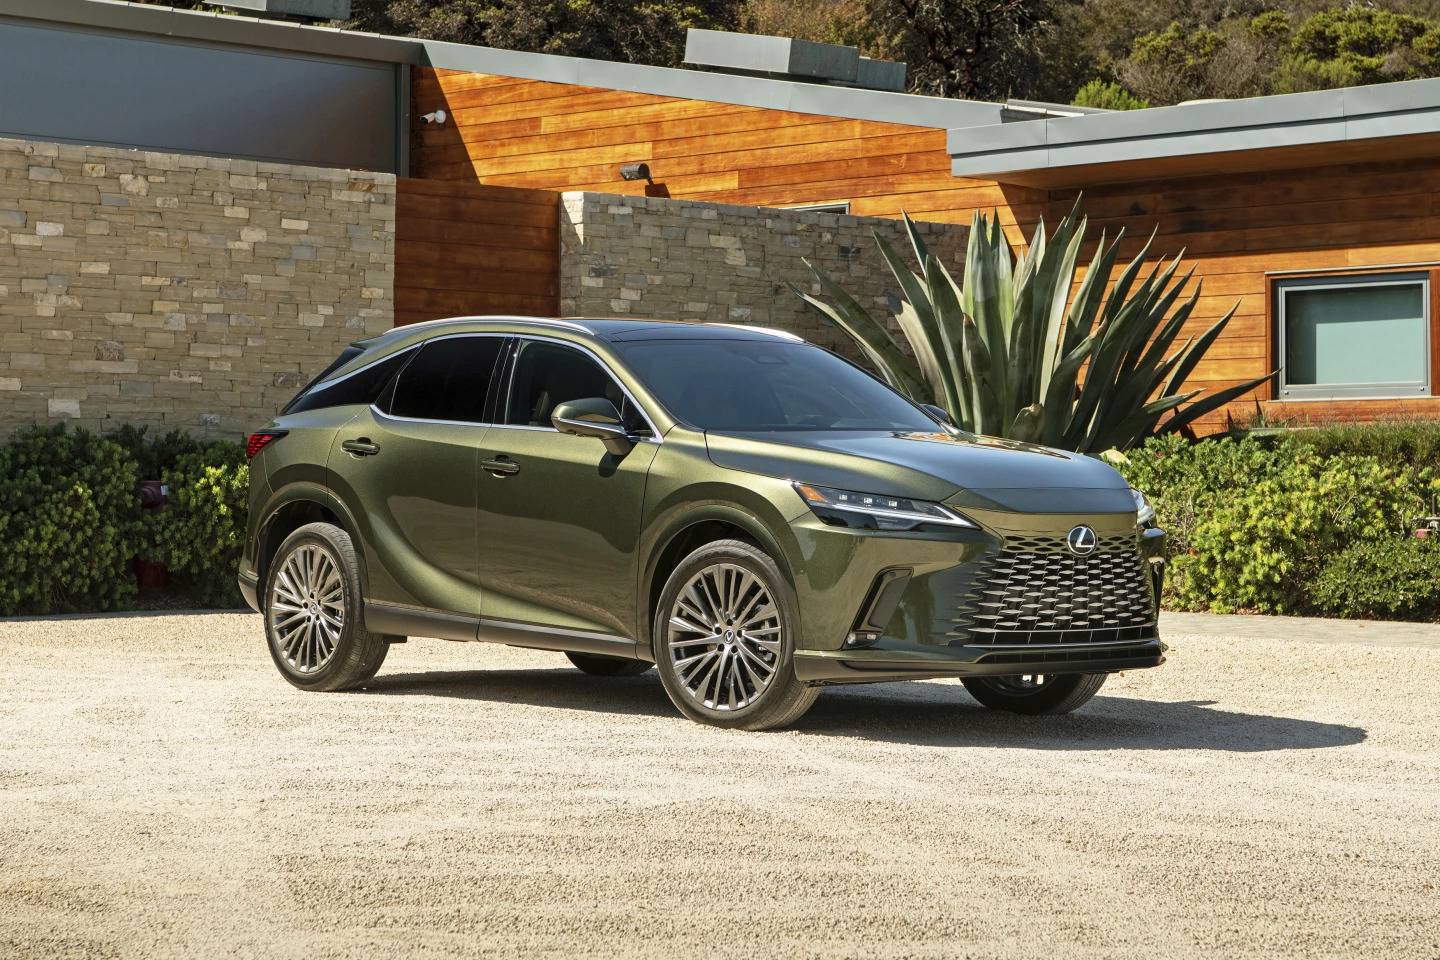 This photo provided by Lexus shows the 2023 RX 350h. The RX 350h is the hybrid version of the RX midsize SUV. It gets an EPA-estimated 36 mpg to go along with its smooth ride and luxurious cabin.